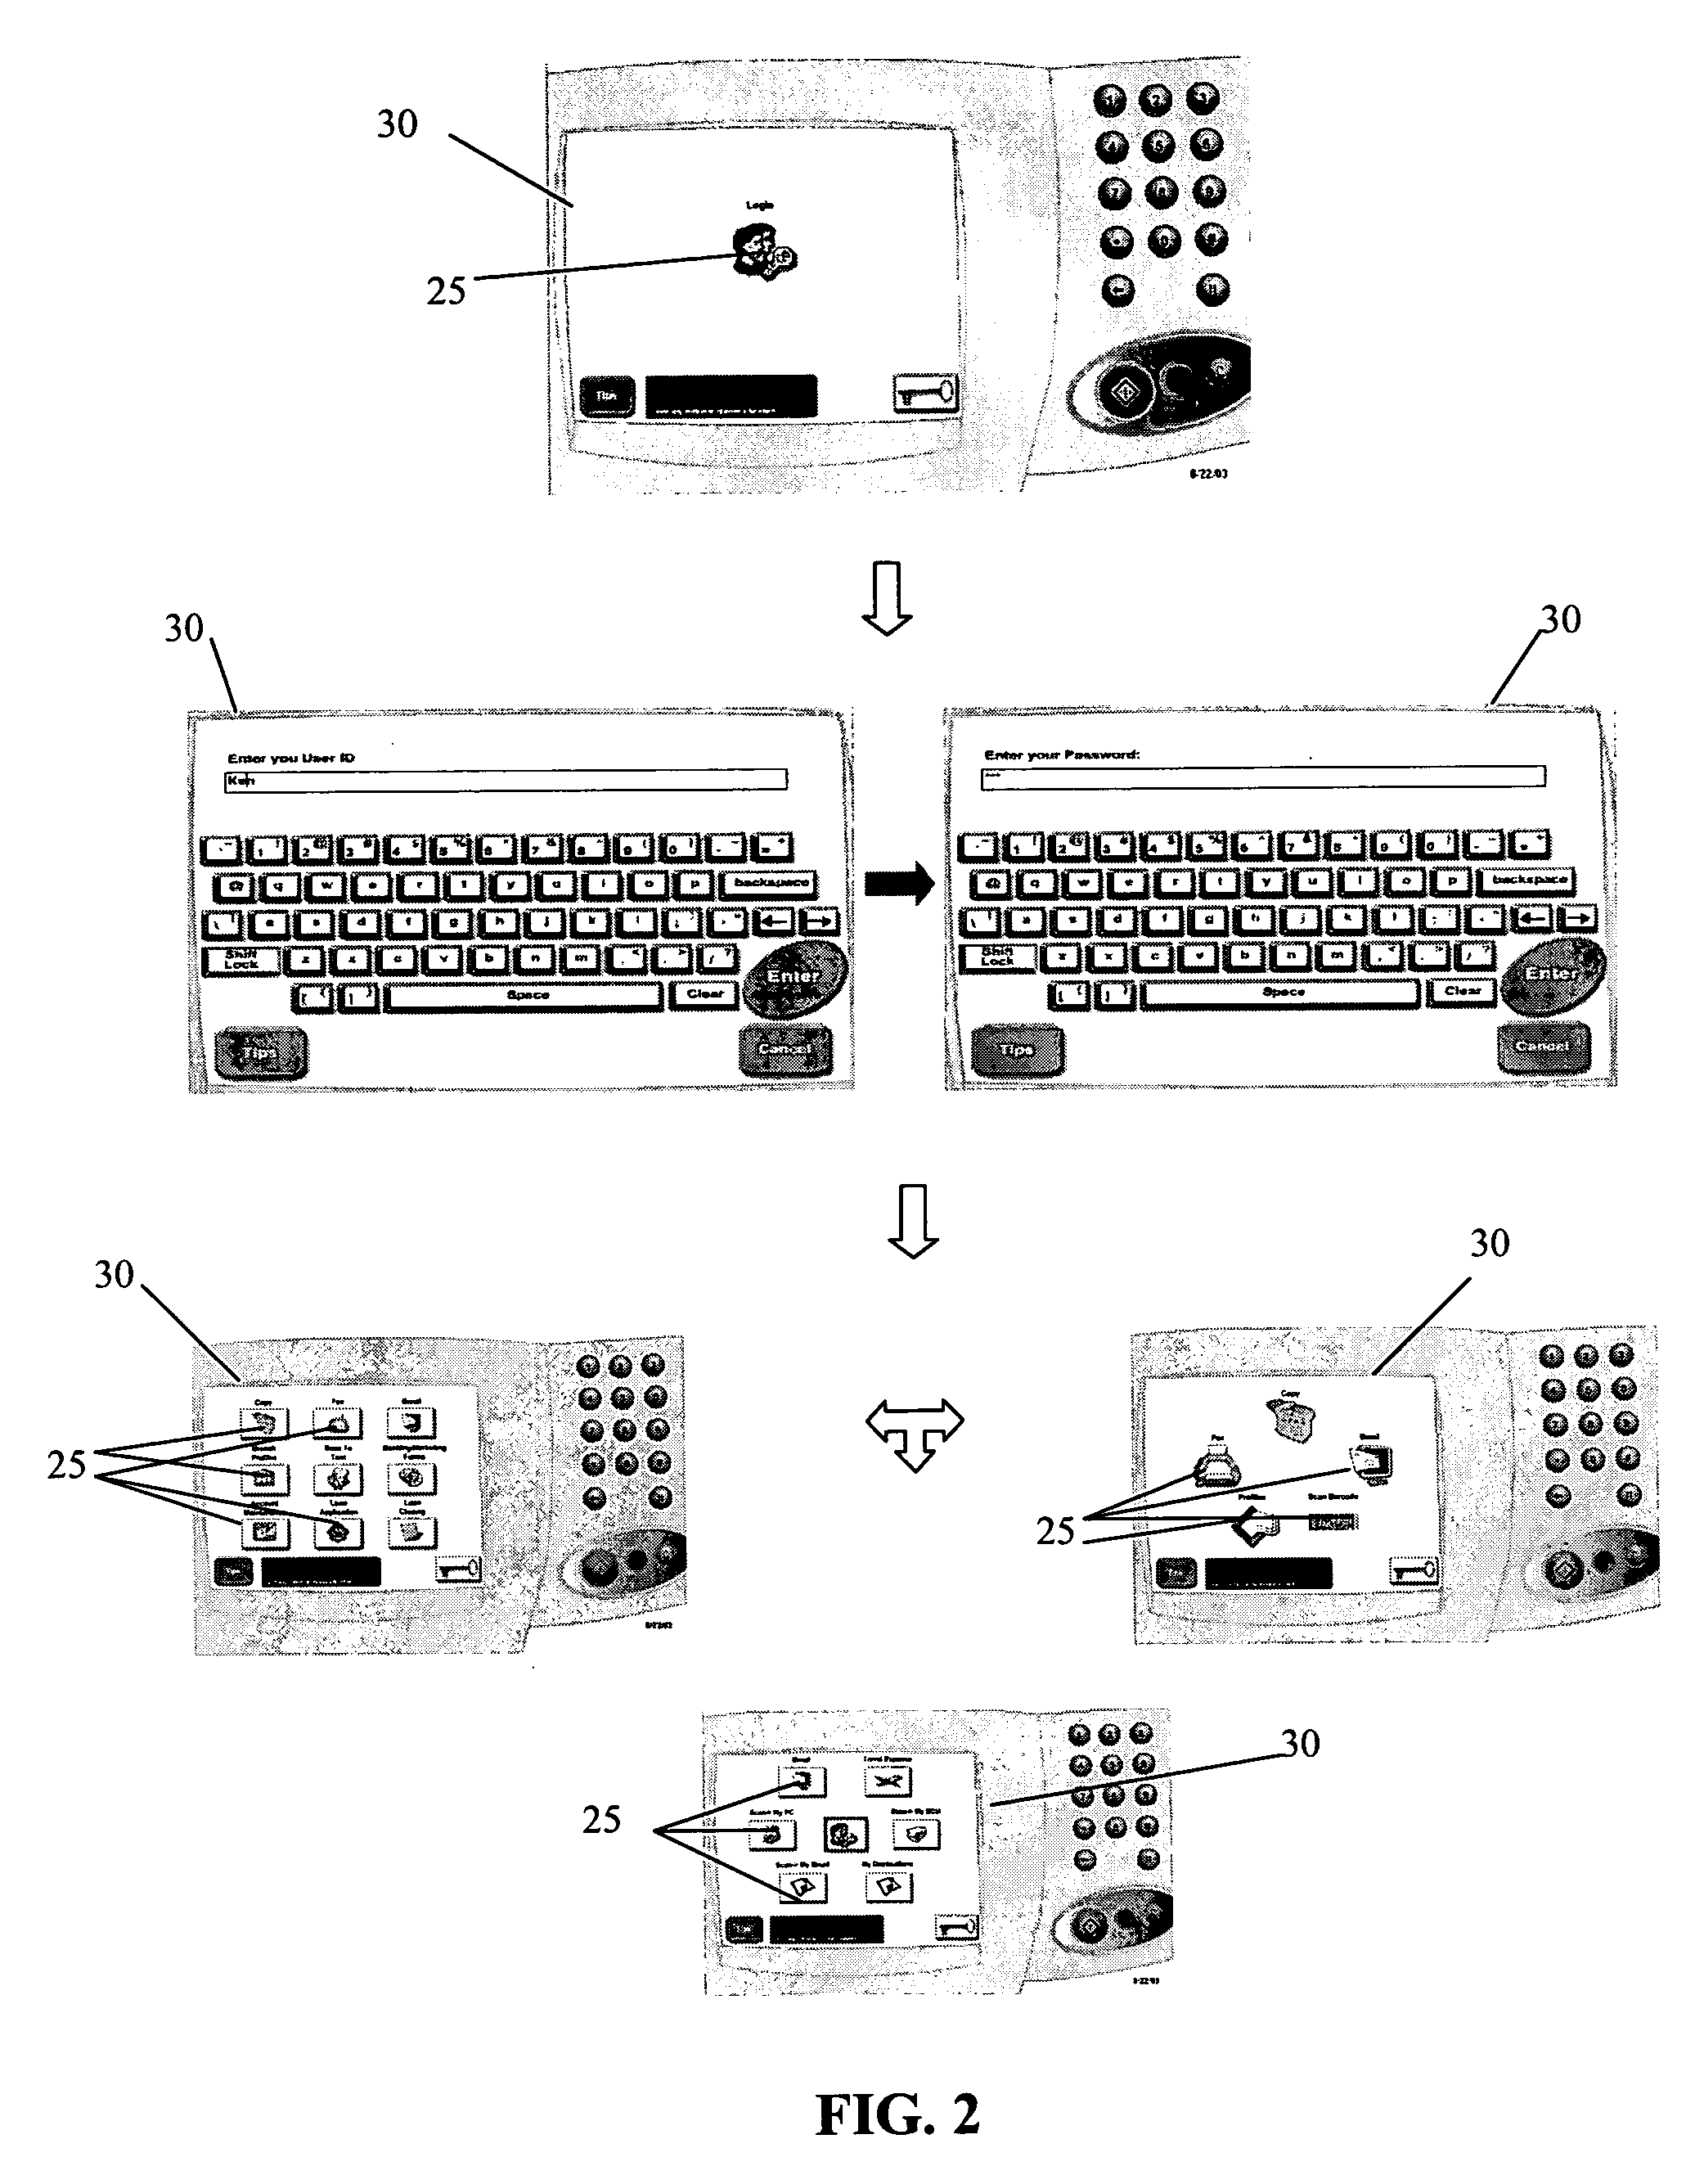 Apparatus and method regarding dynamic icons on a graphical user interface